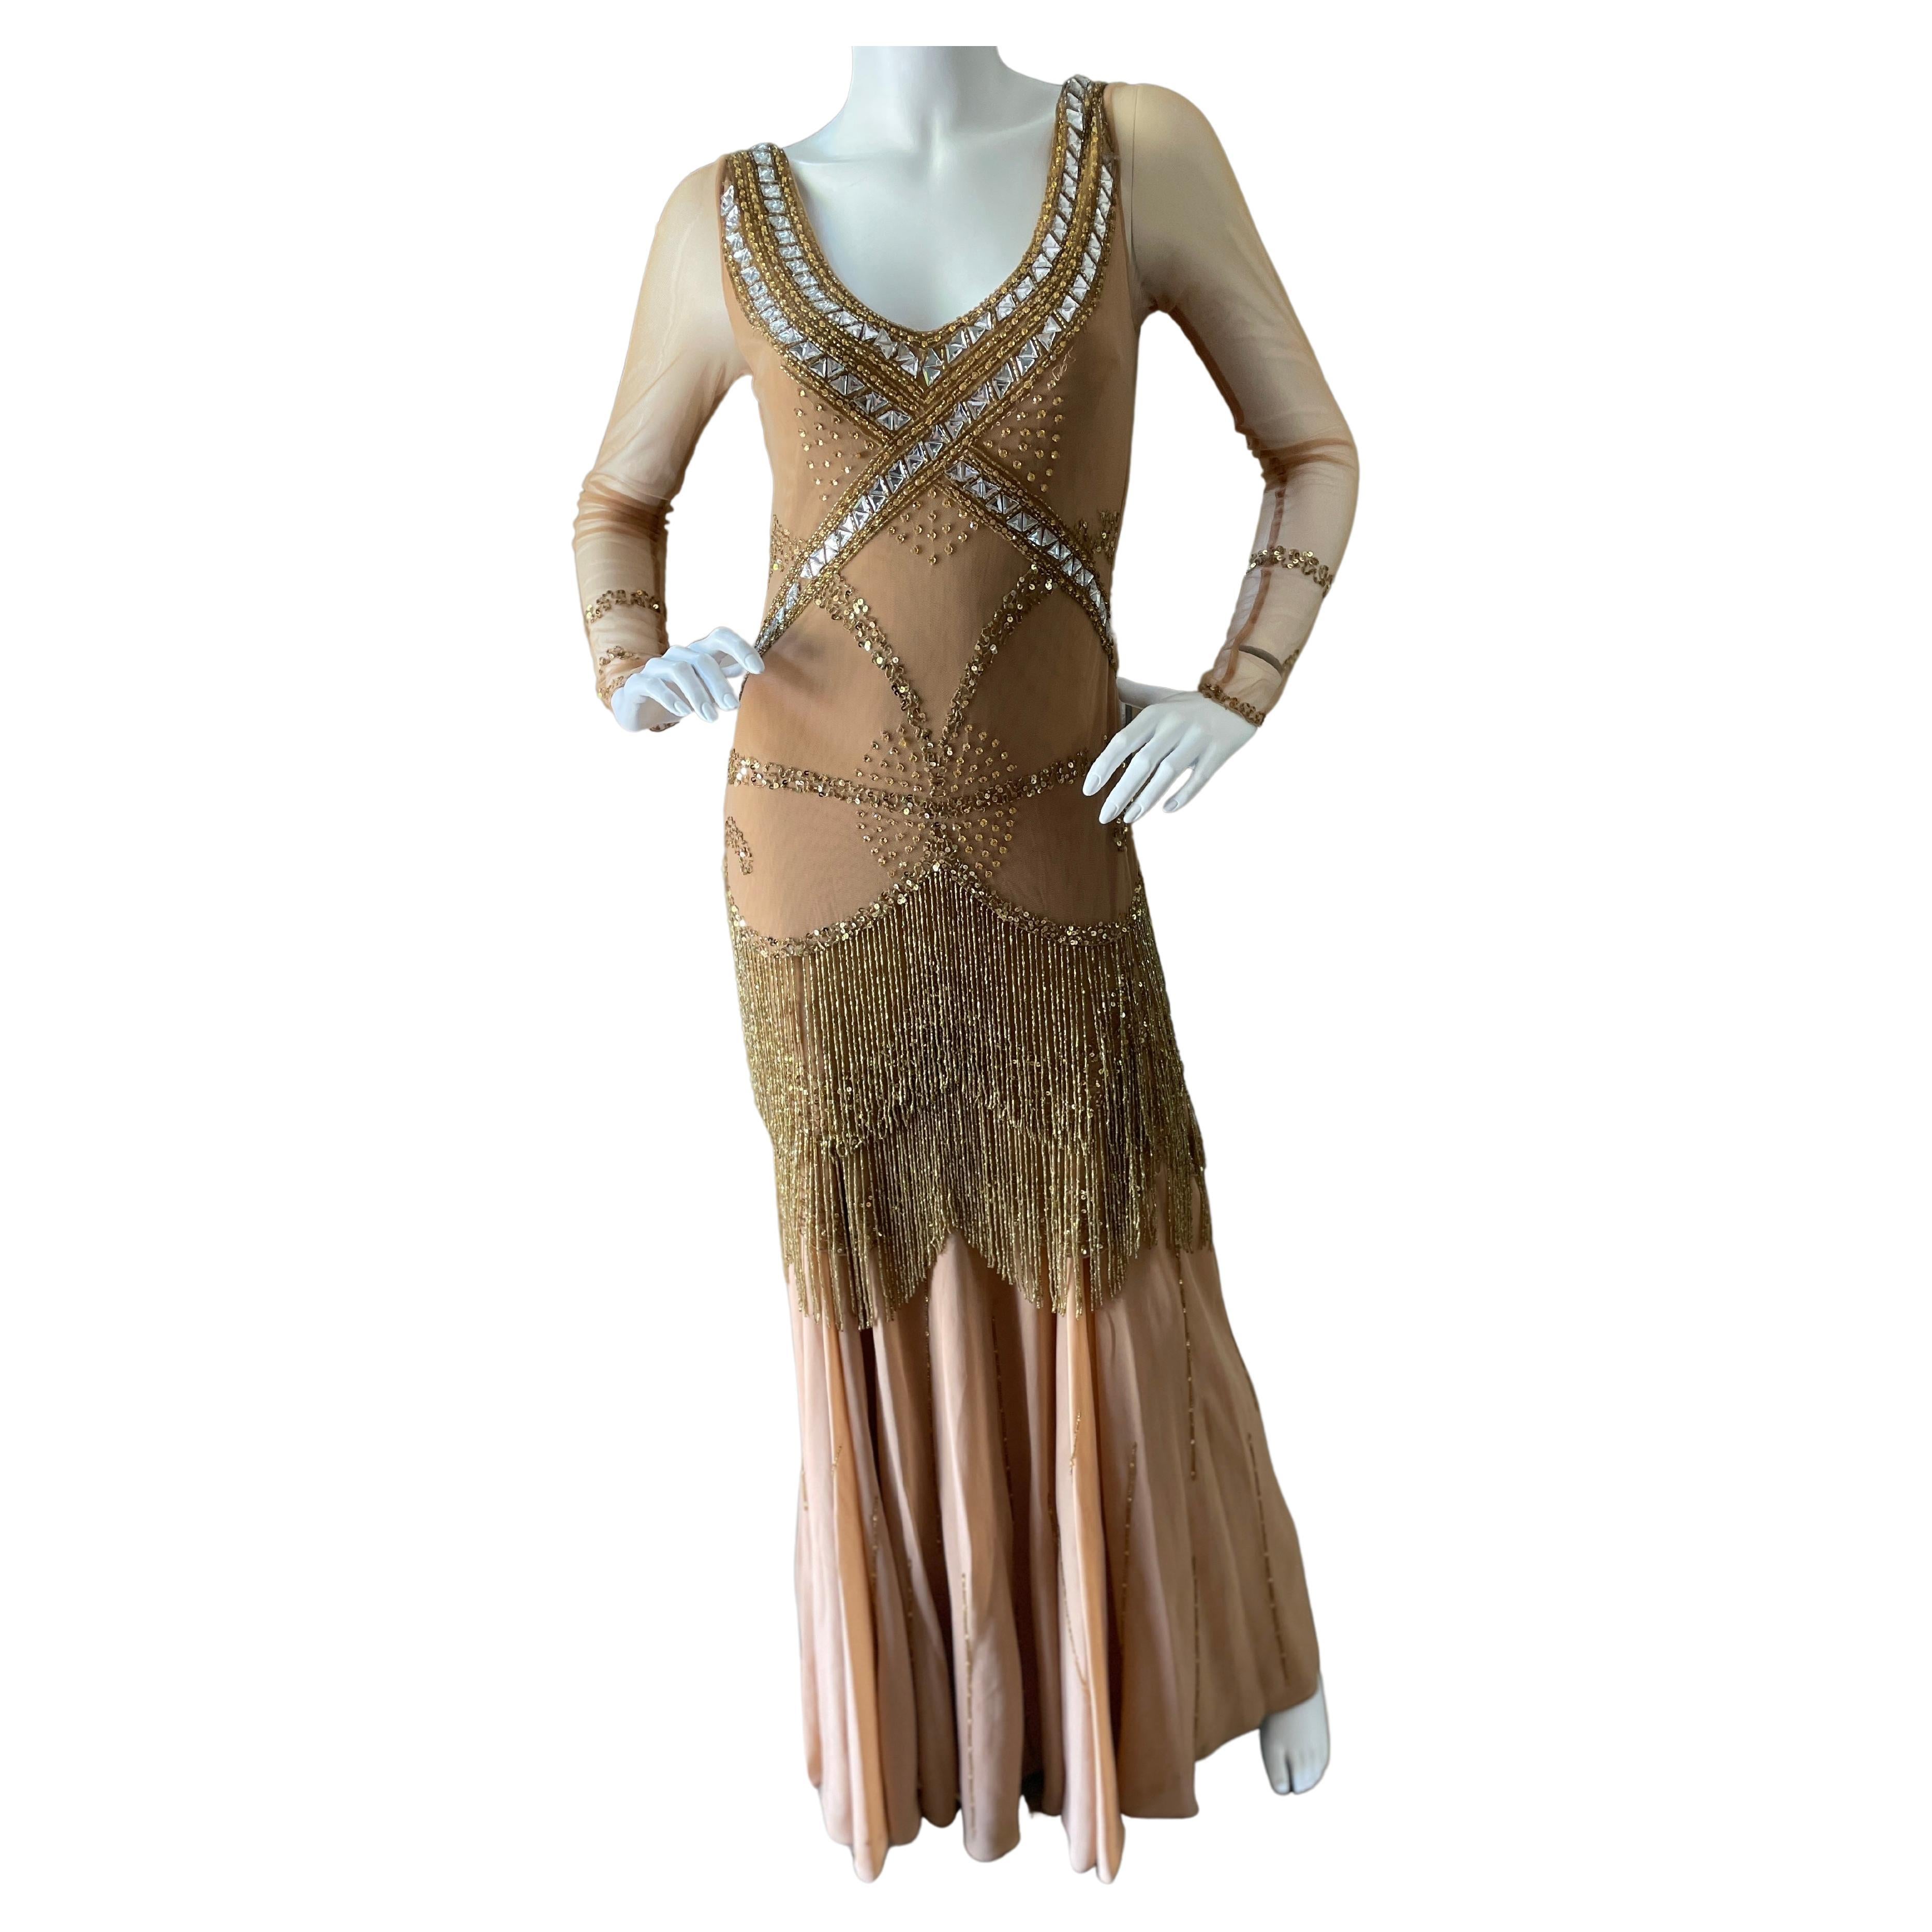 Class Cavalli Extravagantly Jeweled Vintage Evening Dress with Beaded Fringe For Sale